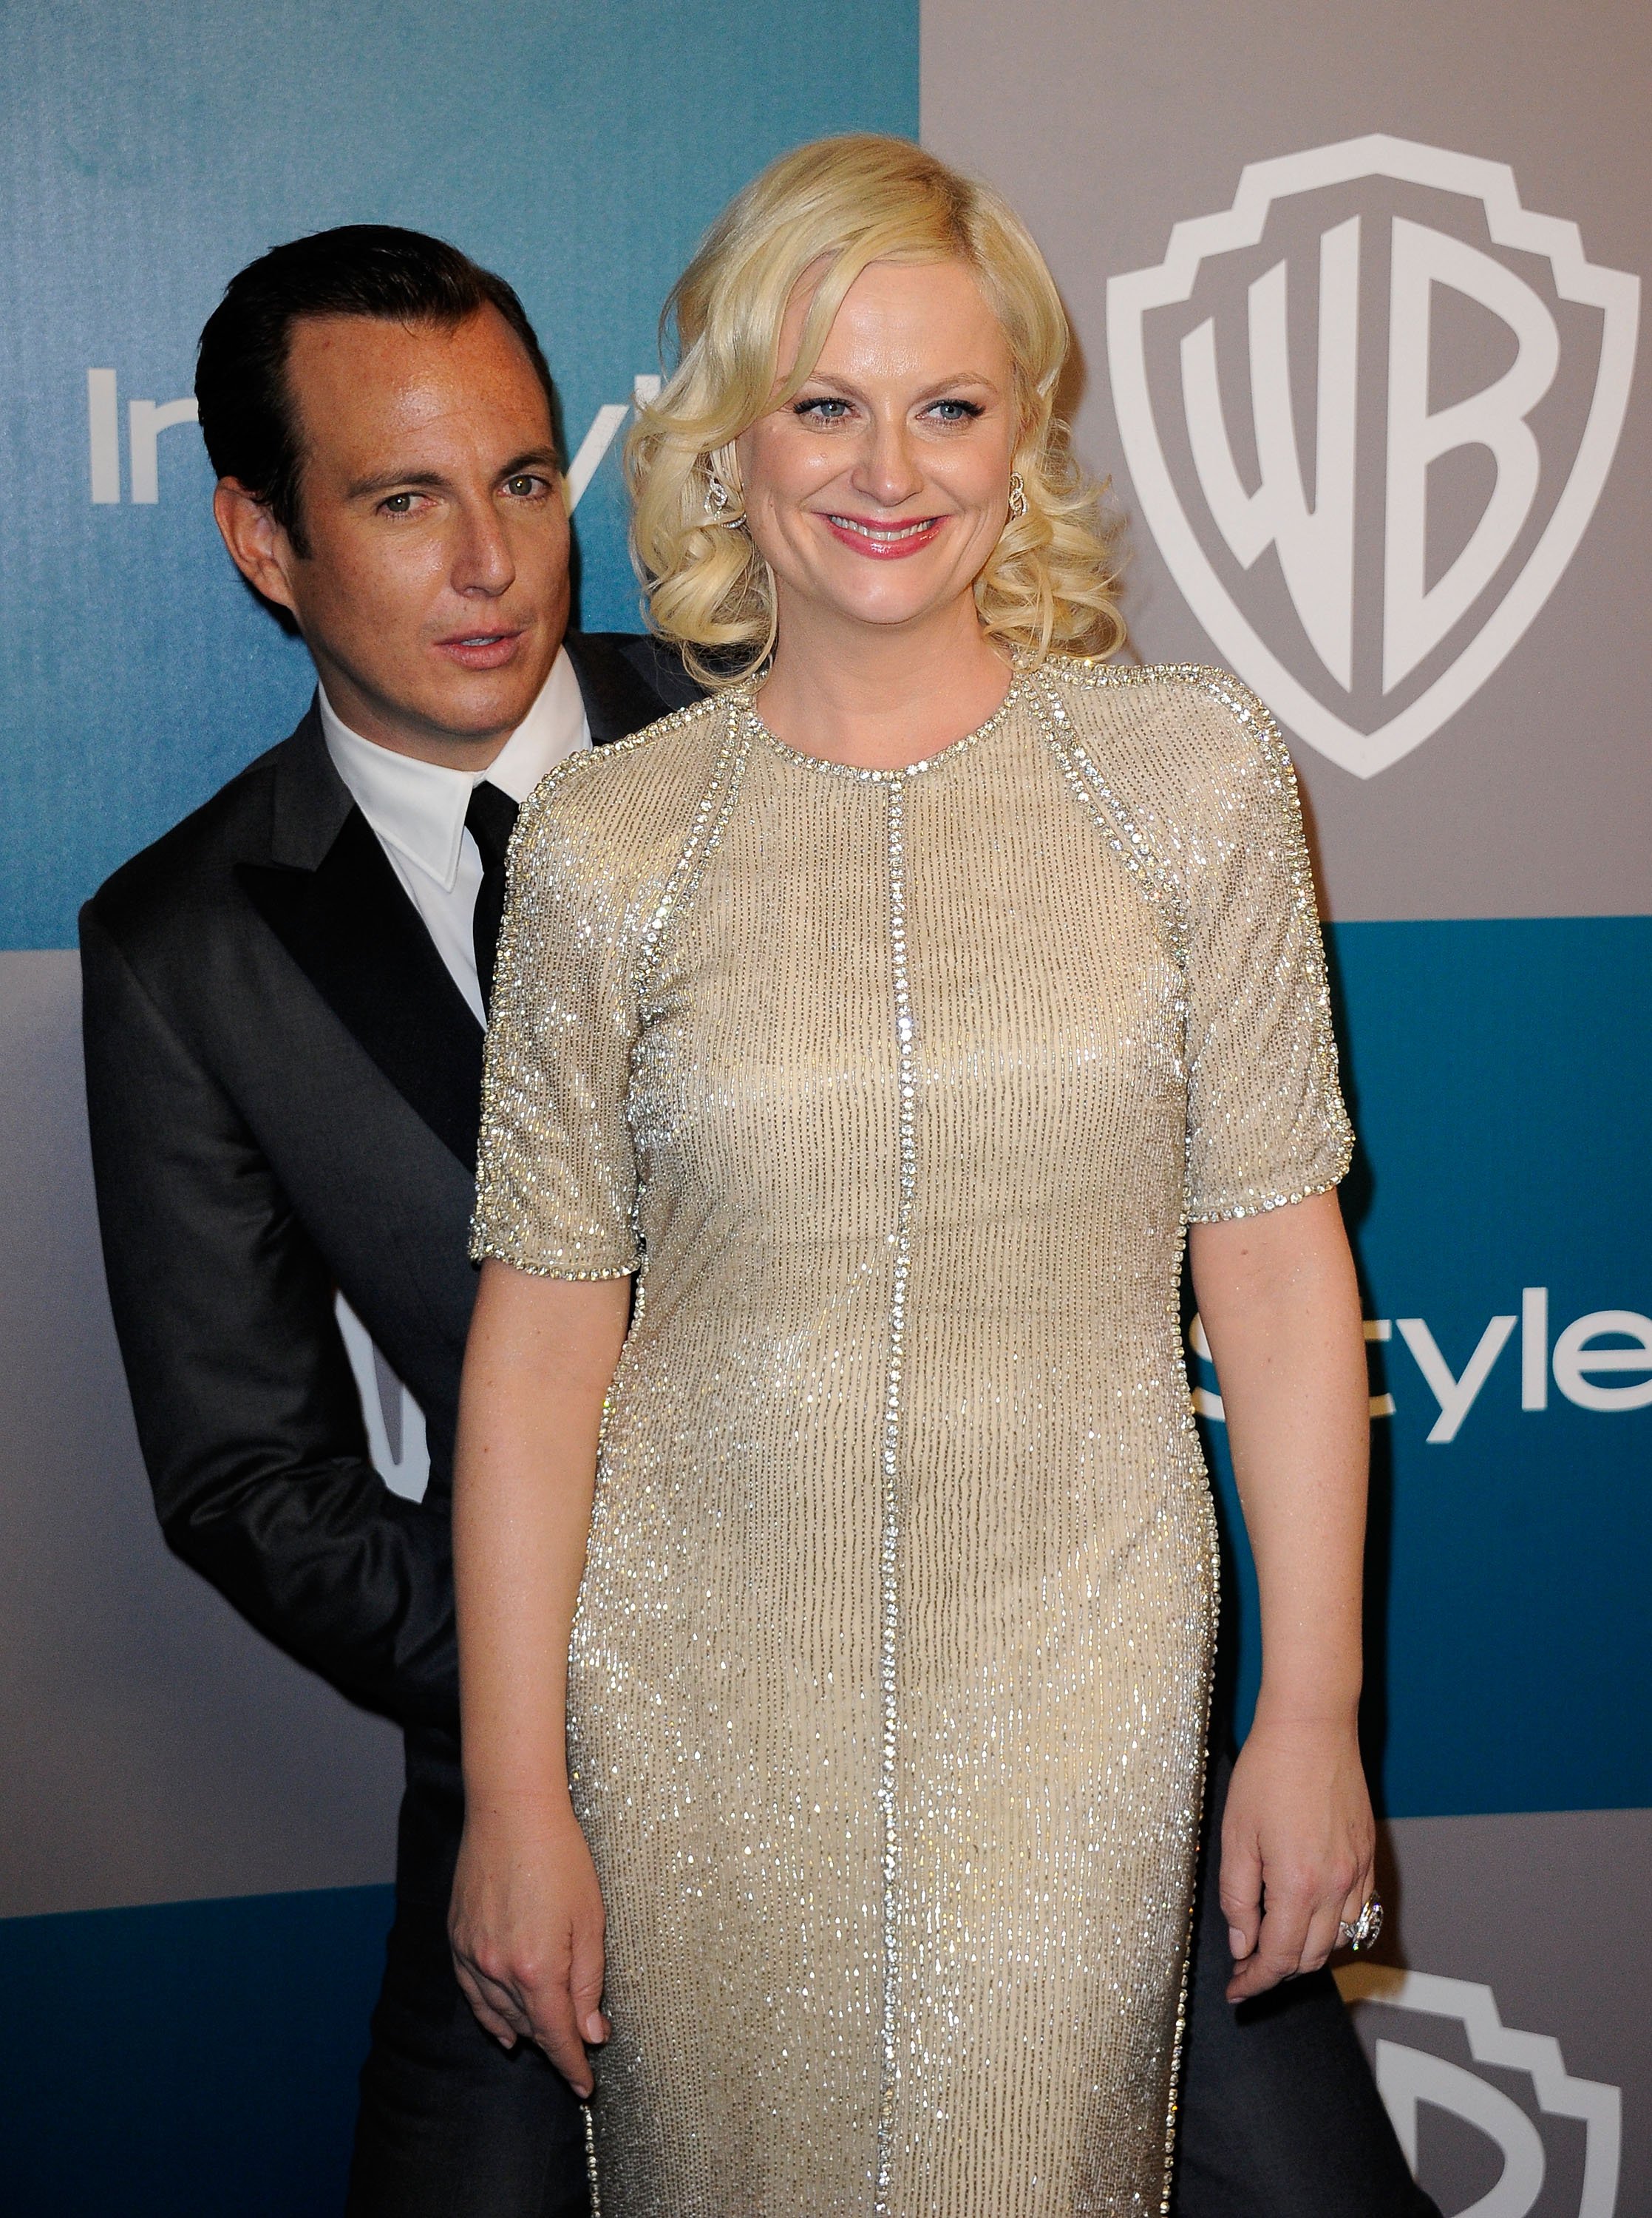 Amy Poehler and Will Arnett arrive at 13th Annual Warner Bros. And InStyle Golden Globe Awards After Party at The Beverly Hilton hotel on January 15, 2012 | Photo: GettyImages